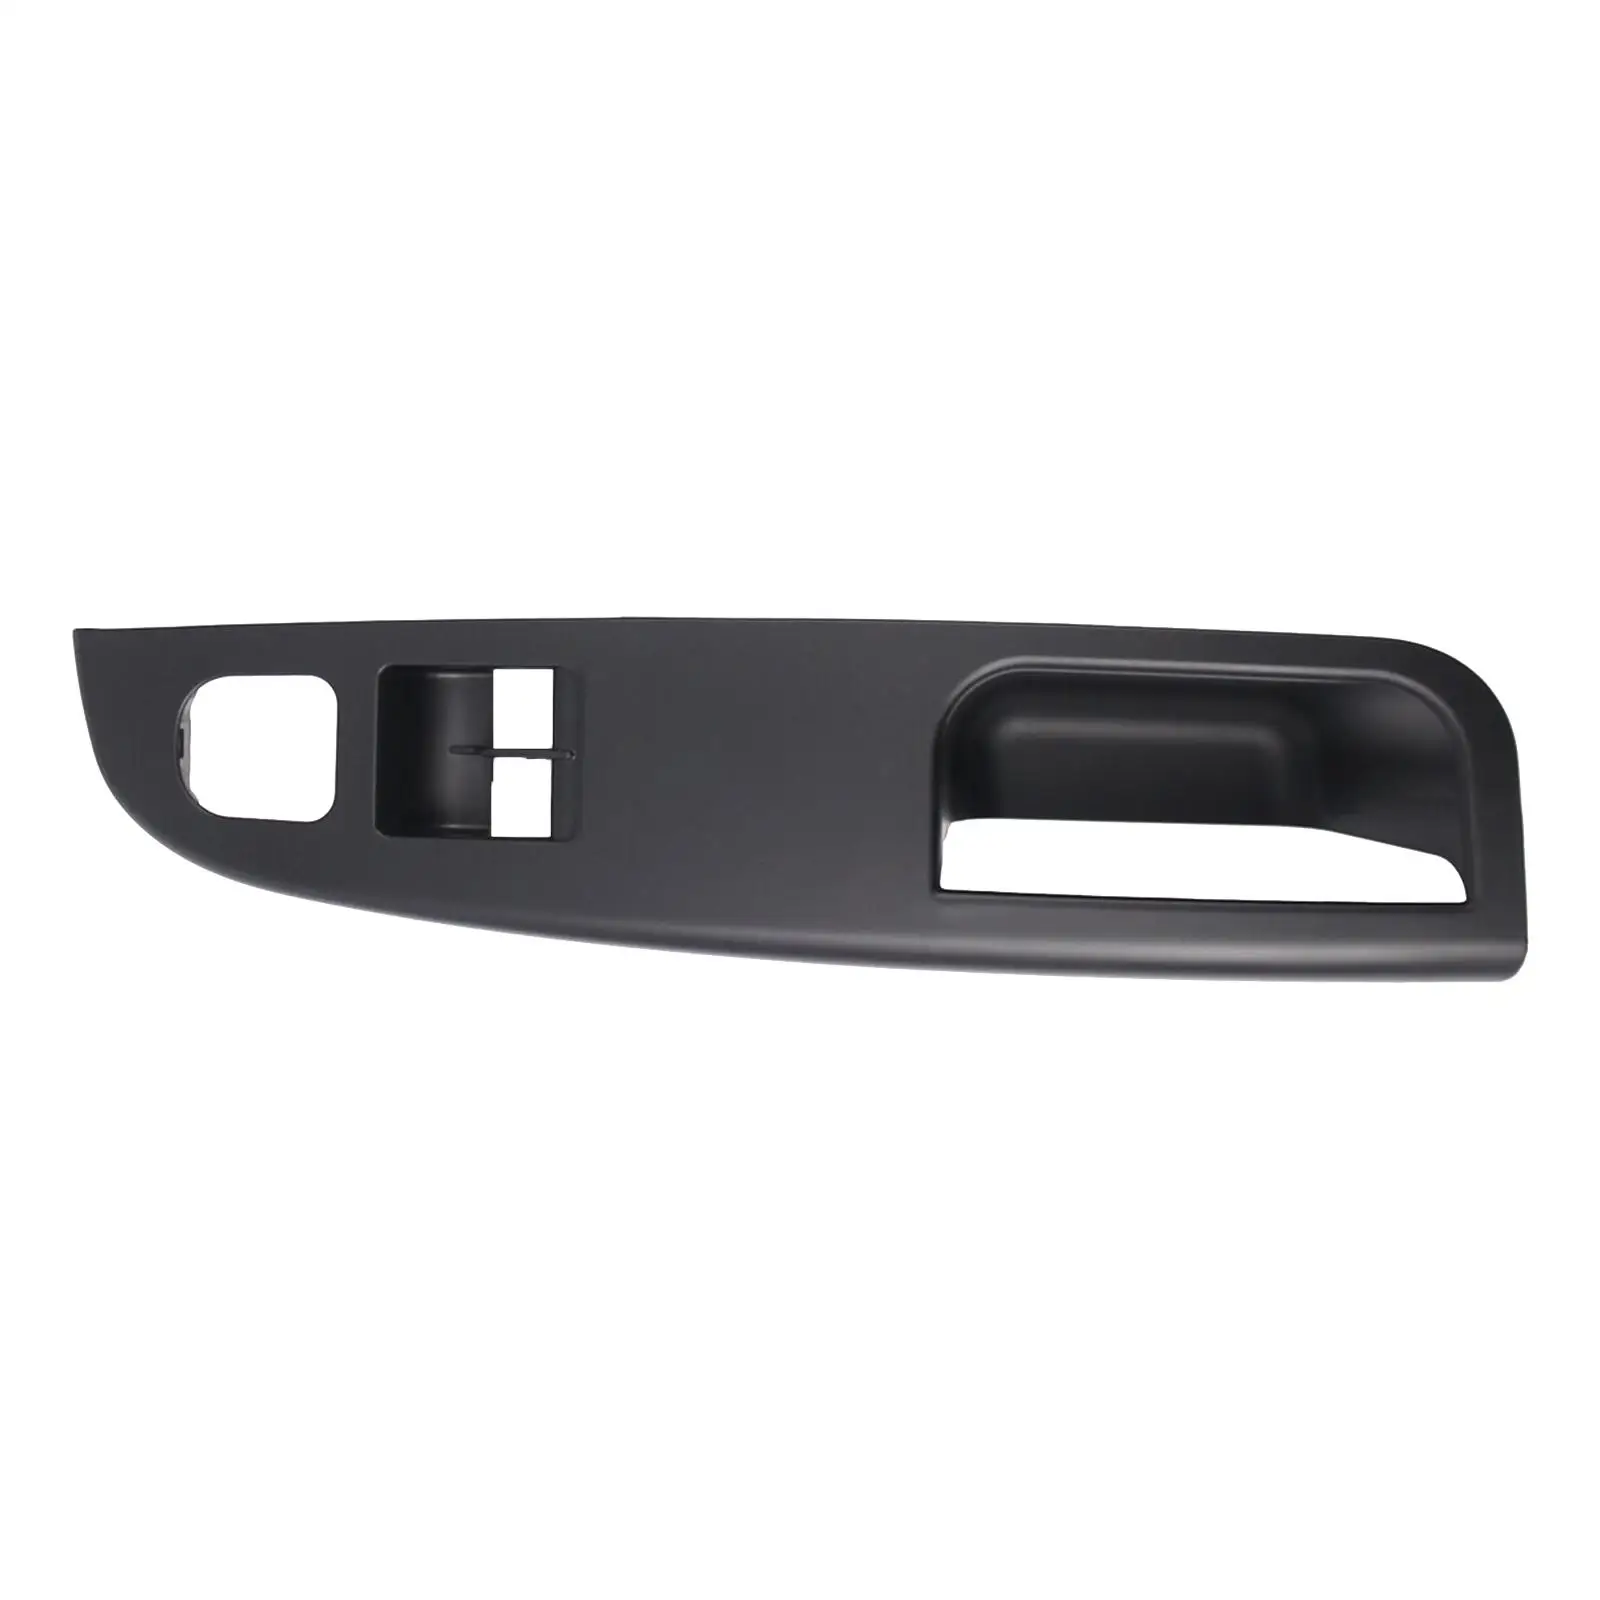 Driver Front Right Side Door Trim 1K3868050B 1K3868050C Replace for VW Golf GTI Automobile Repairing Accessory Professional